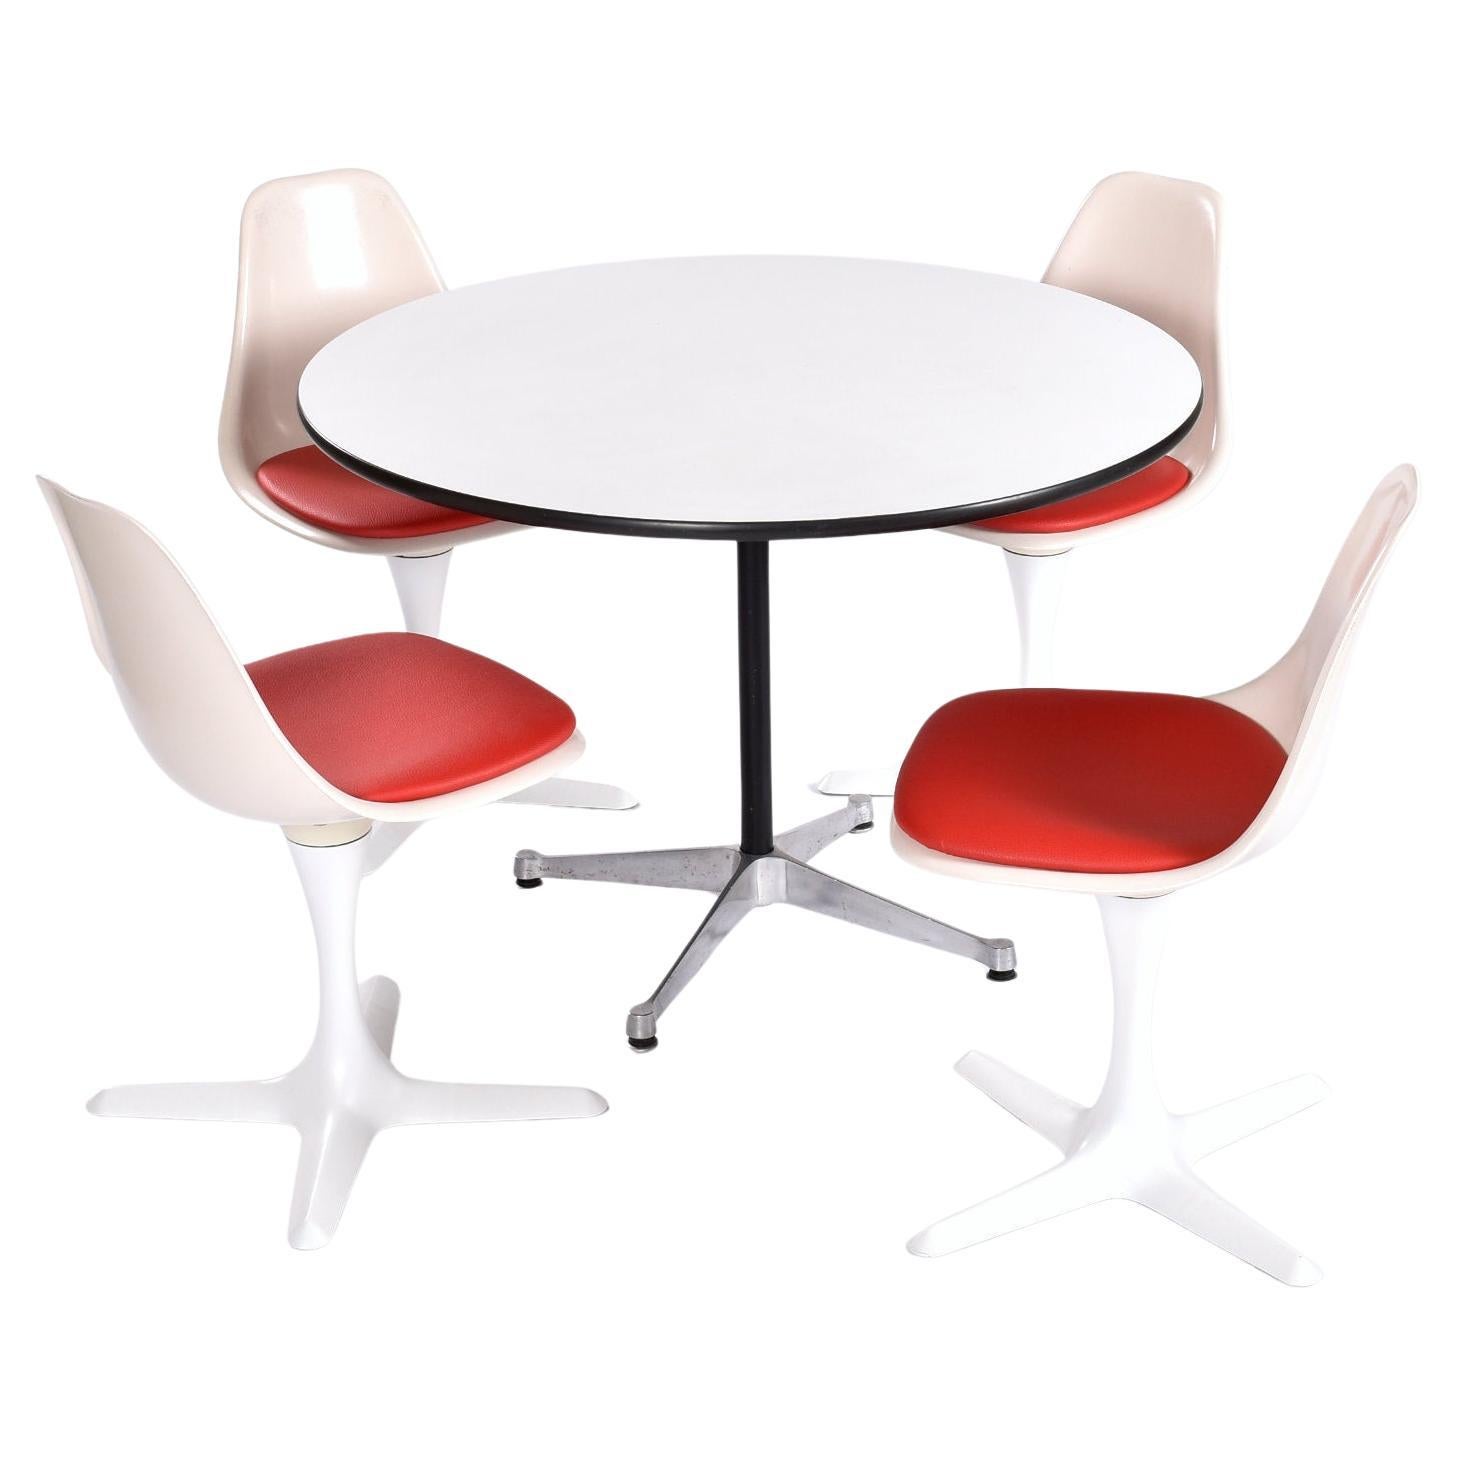 This listing is for the table alone. The chairs and accessories pictured are not included. 

Vintage Eames round white laminate table for Herman Miller. The 42″ diameter dining table rests on a classic Charles Eames aluminum contract base with black